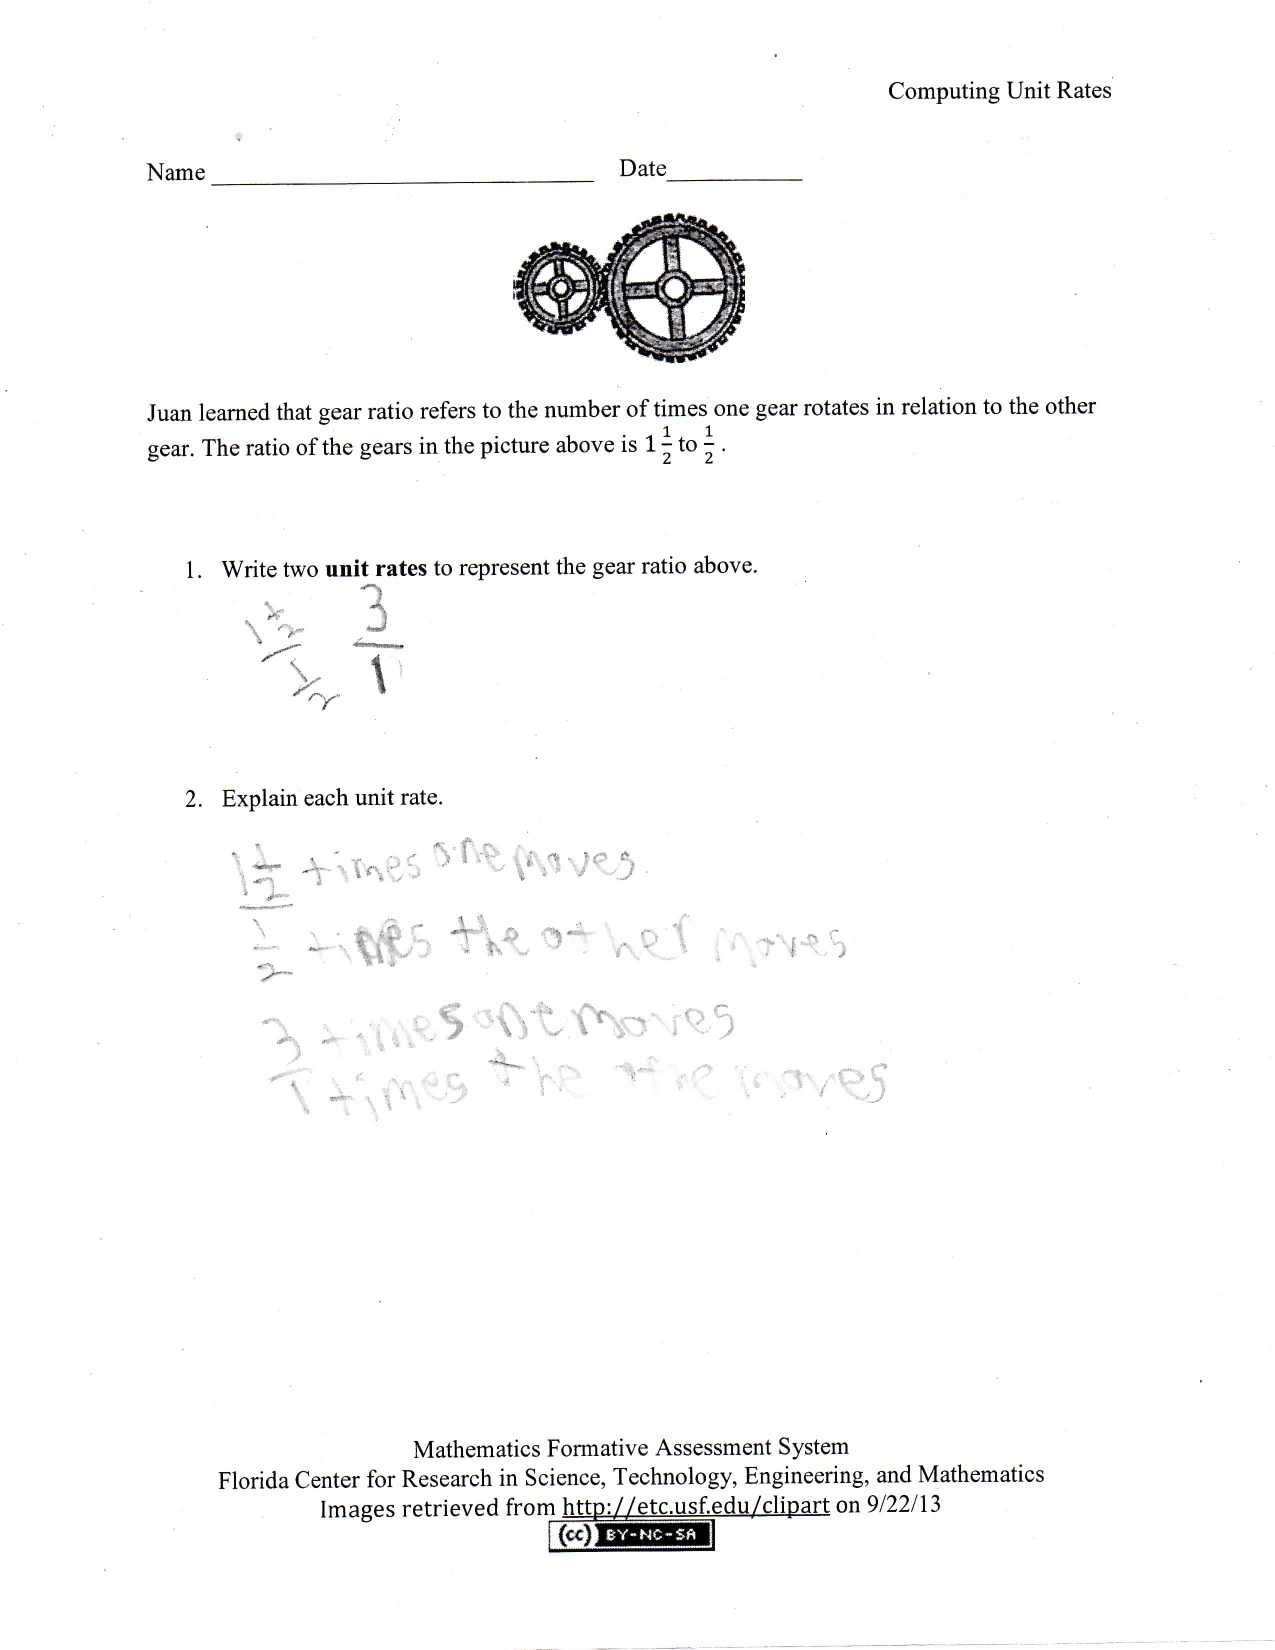 Ratios Involving Complex Fractions Worksheet or 7 Rp 1 Worksheets the Best Worksheets Image Collection